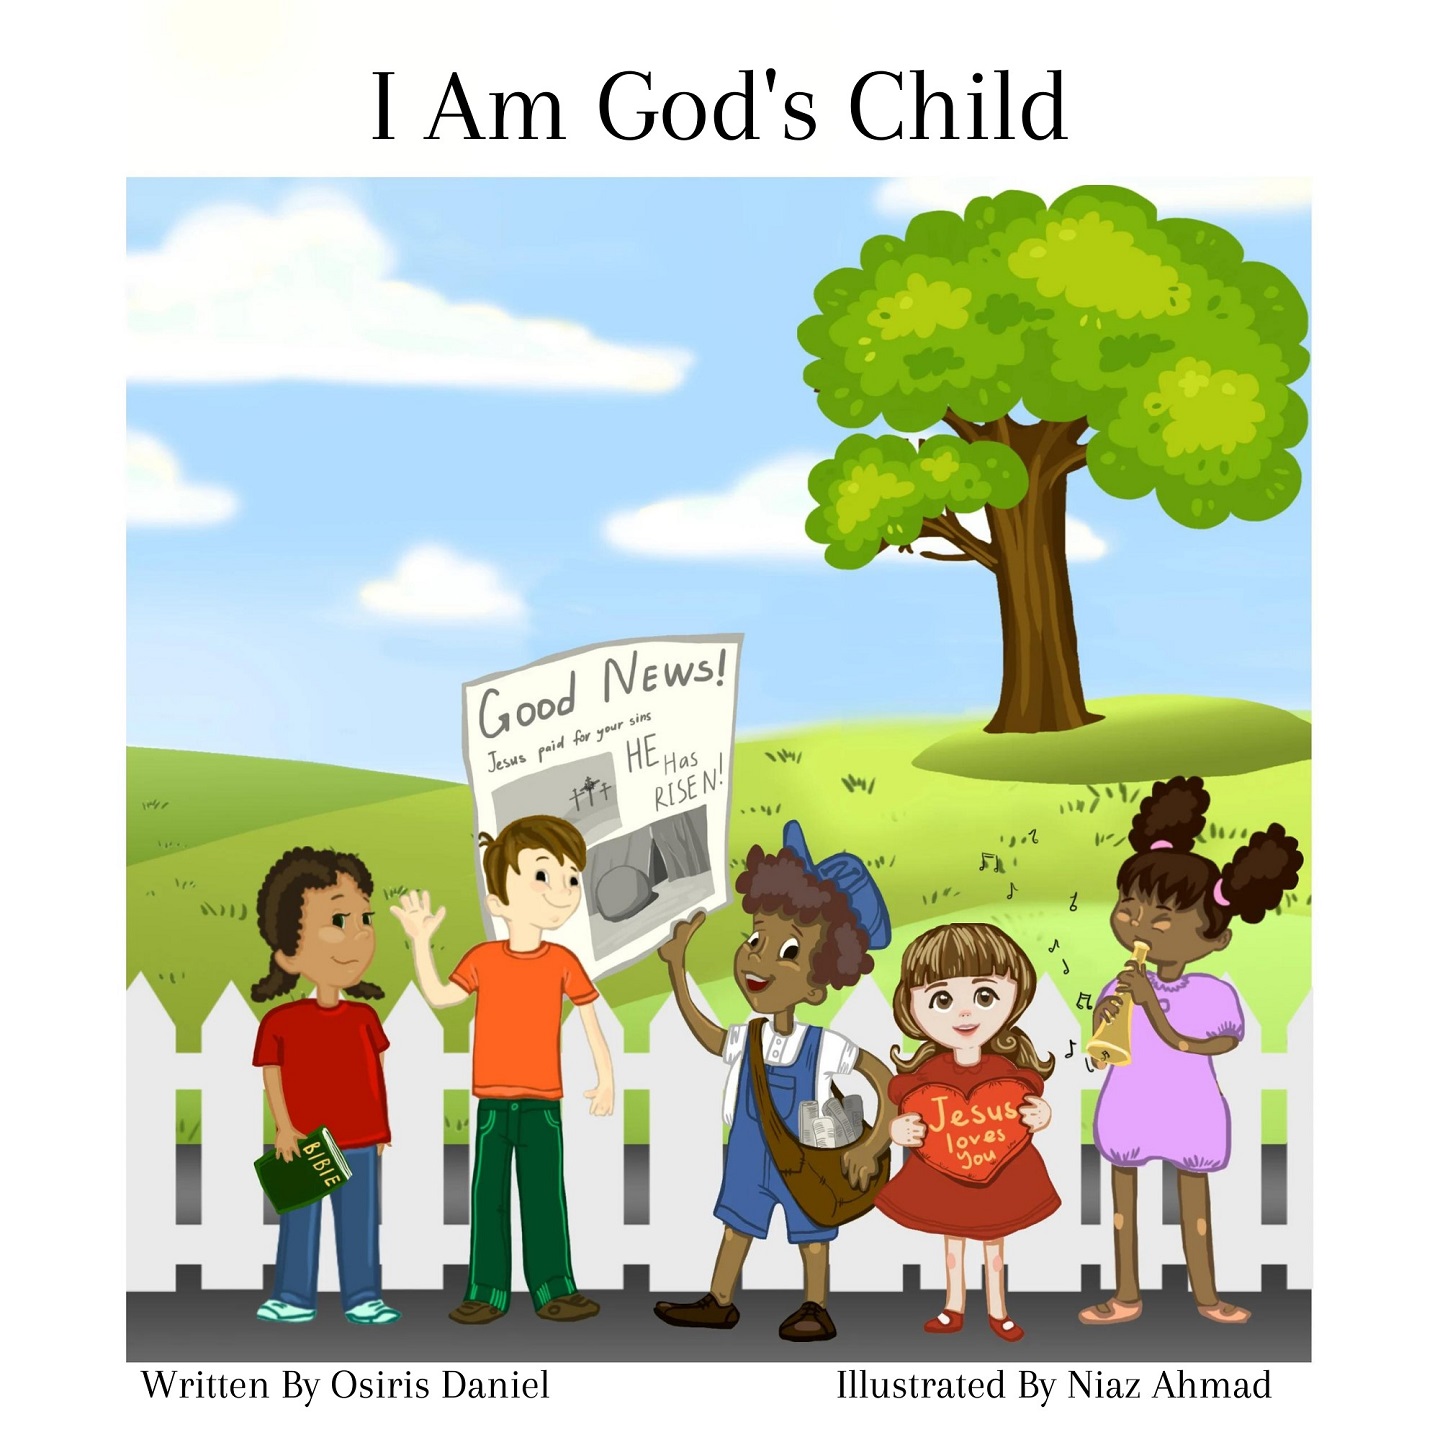 New Children’s Picture Book Teaches God & Christ’s Love Through Poetry